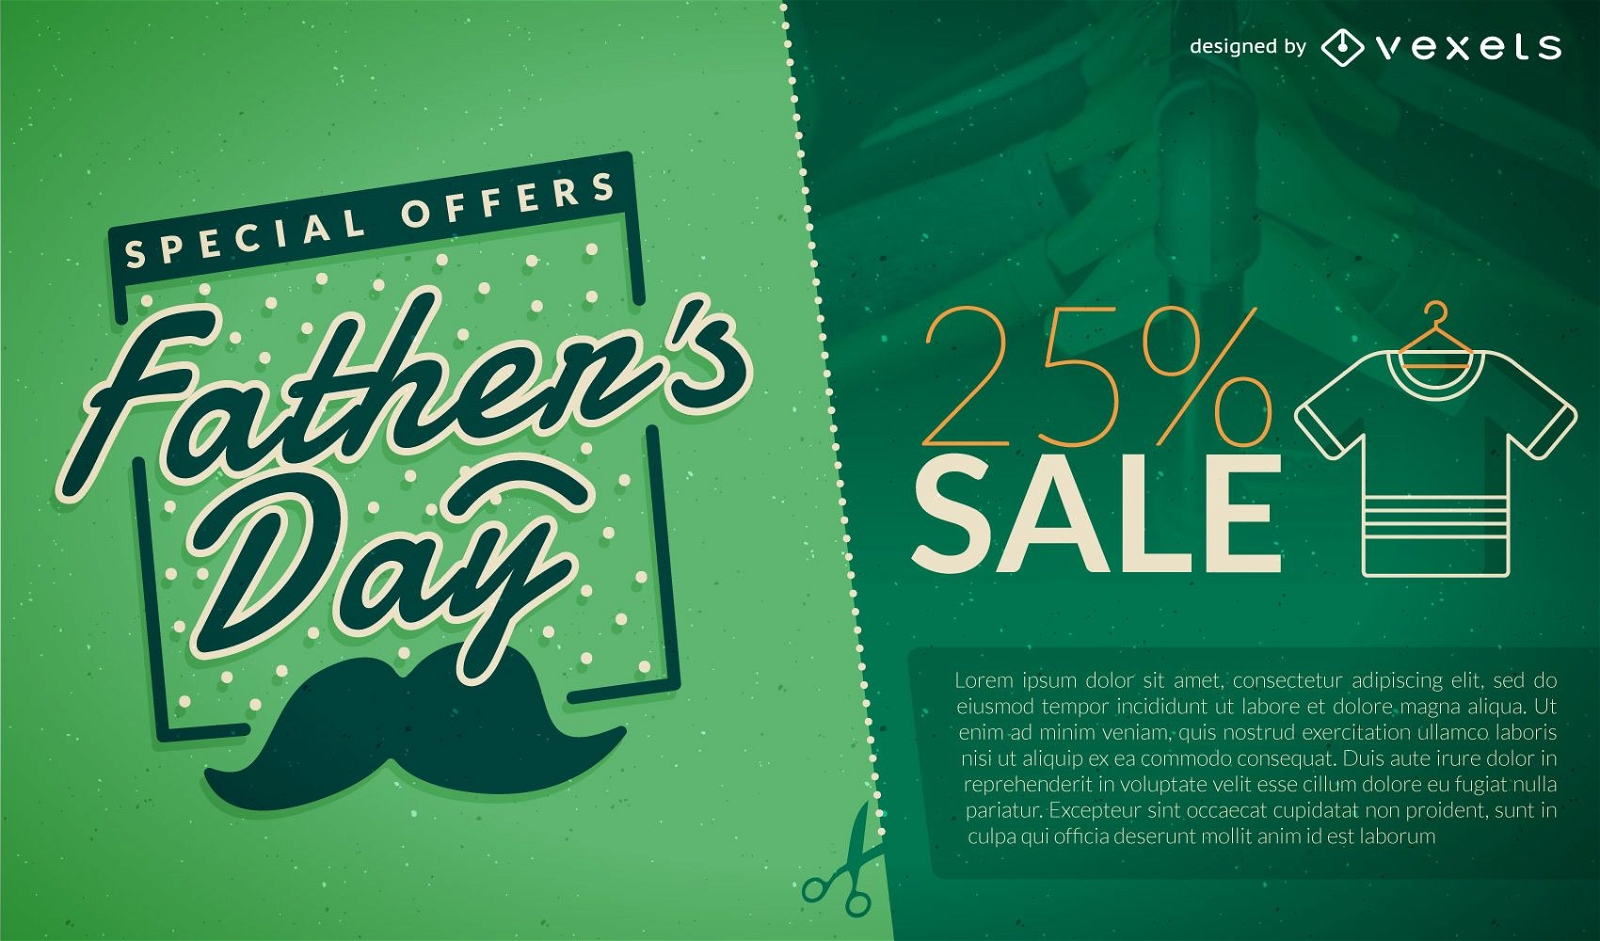 Fathers Day Promo